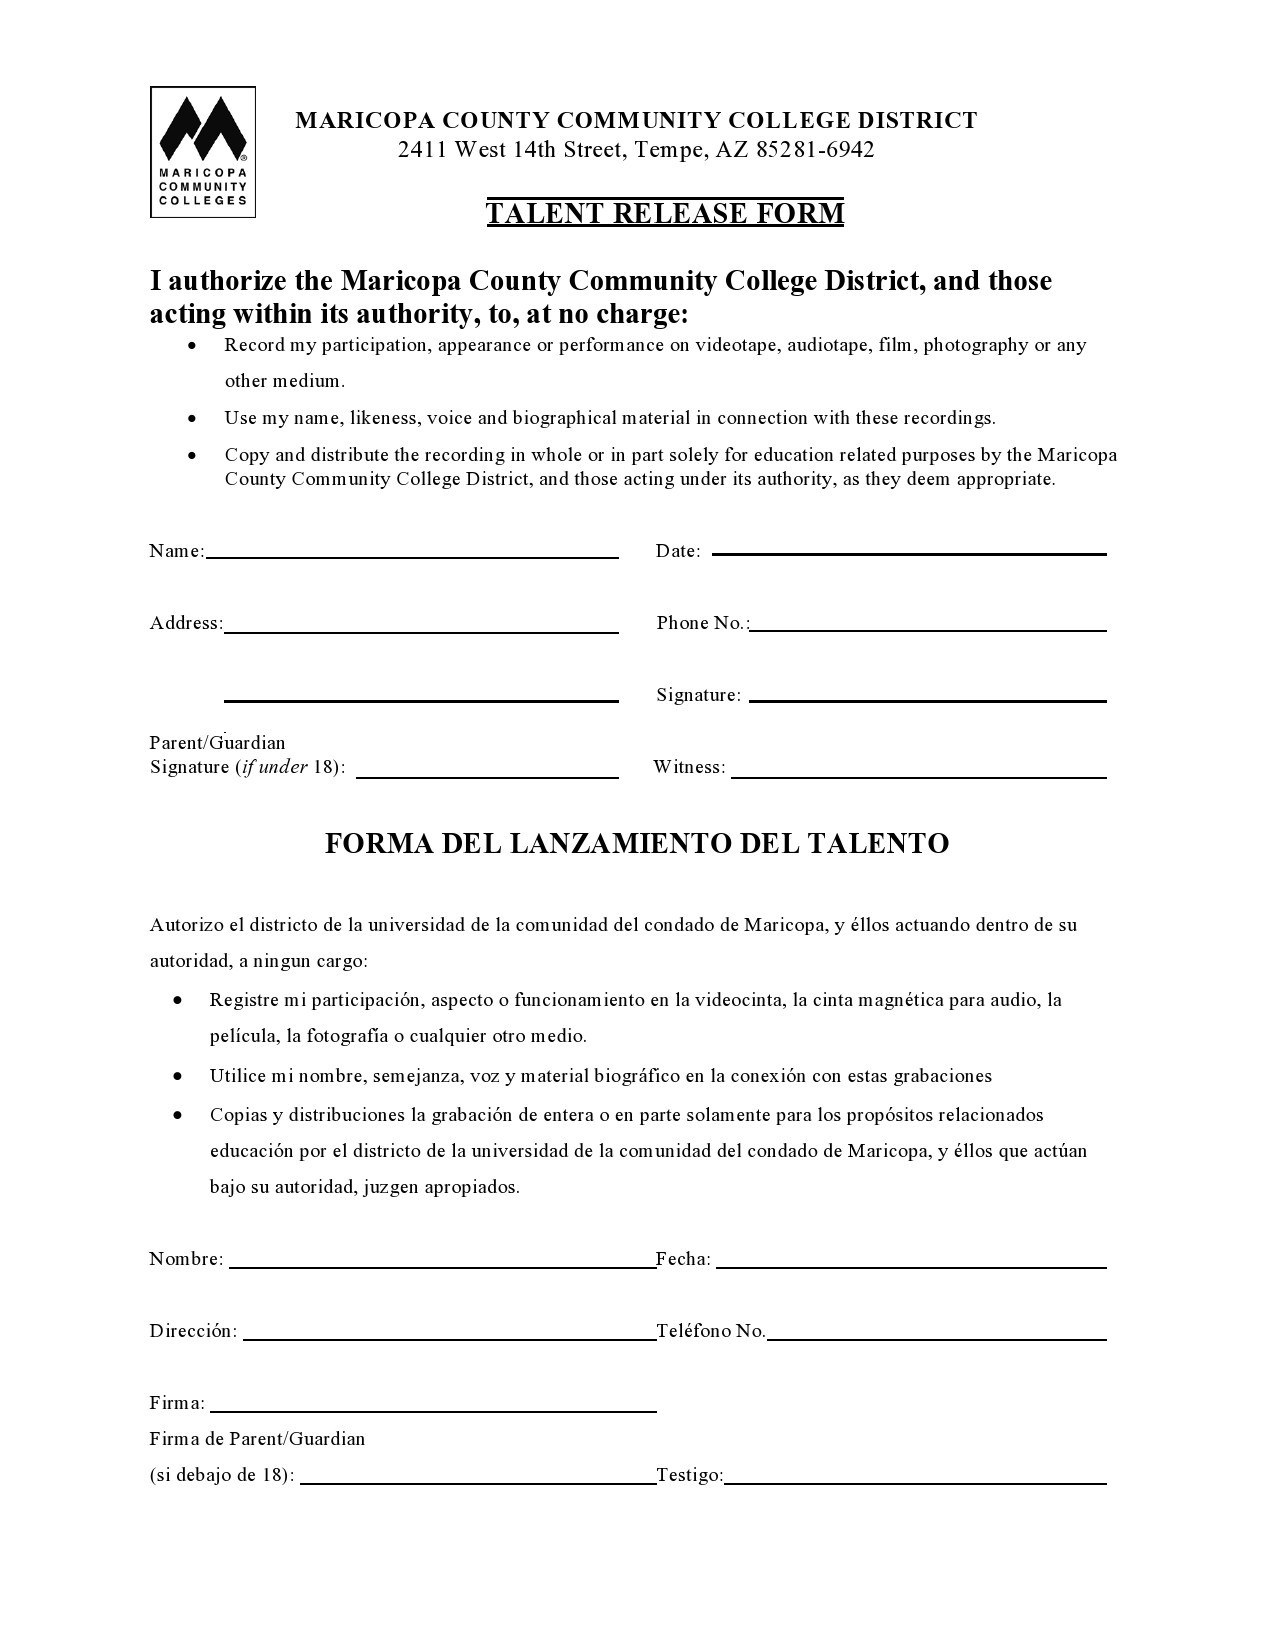 Free talent release form 02